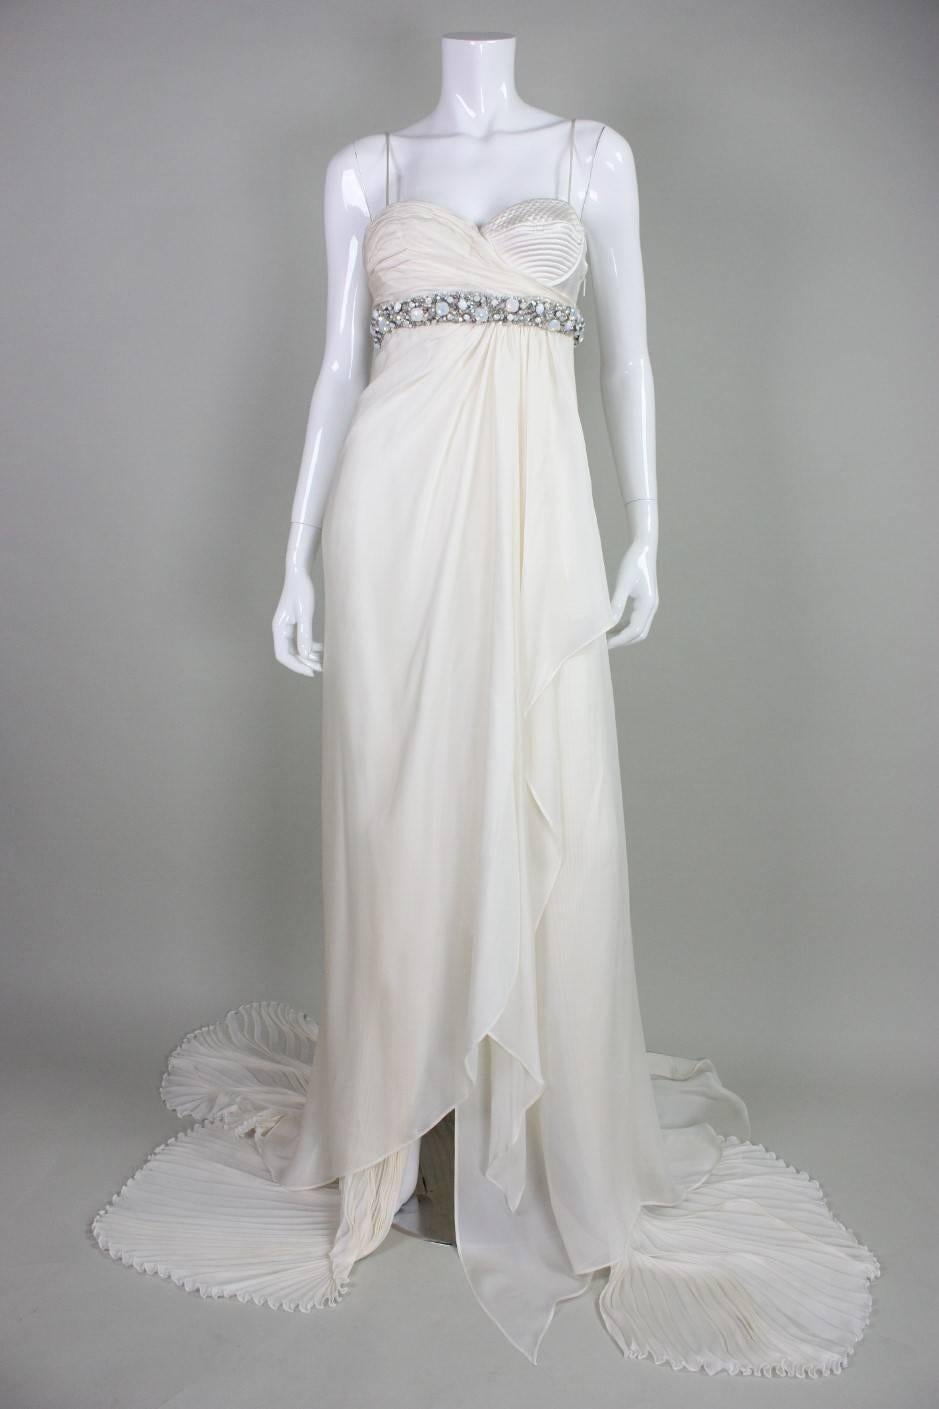 Roberto Cavalli silk chiffon gown likely dates to the 1990’ and is made of ivory silk chiffon with a rhinestone encrusted band under bust. One breast has gathered chiffon while the other is “exposed” with quilted detailing. Fabric is gathered under